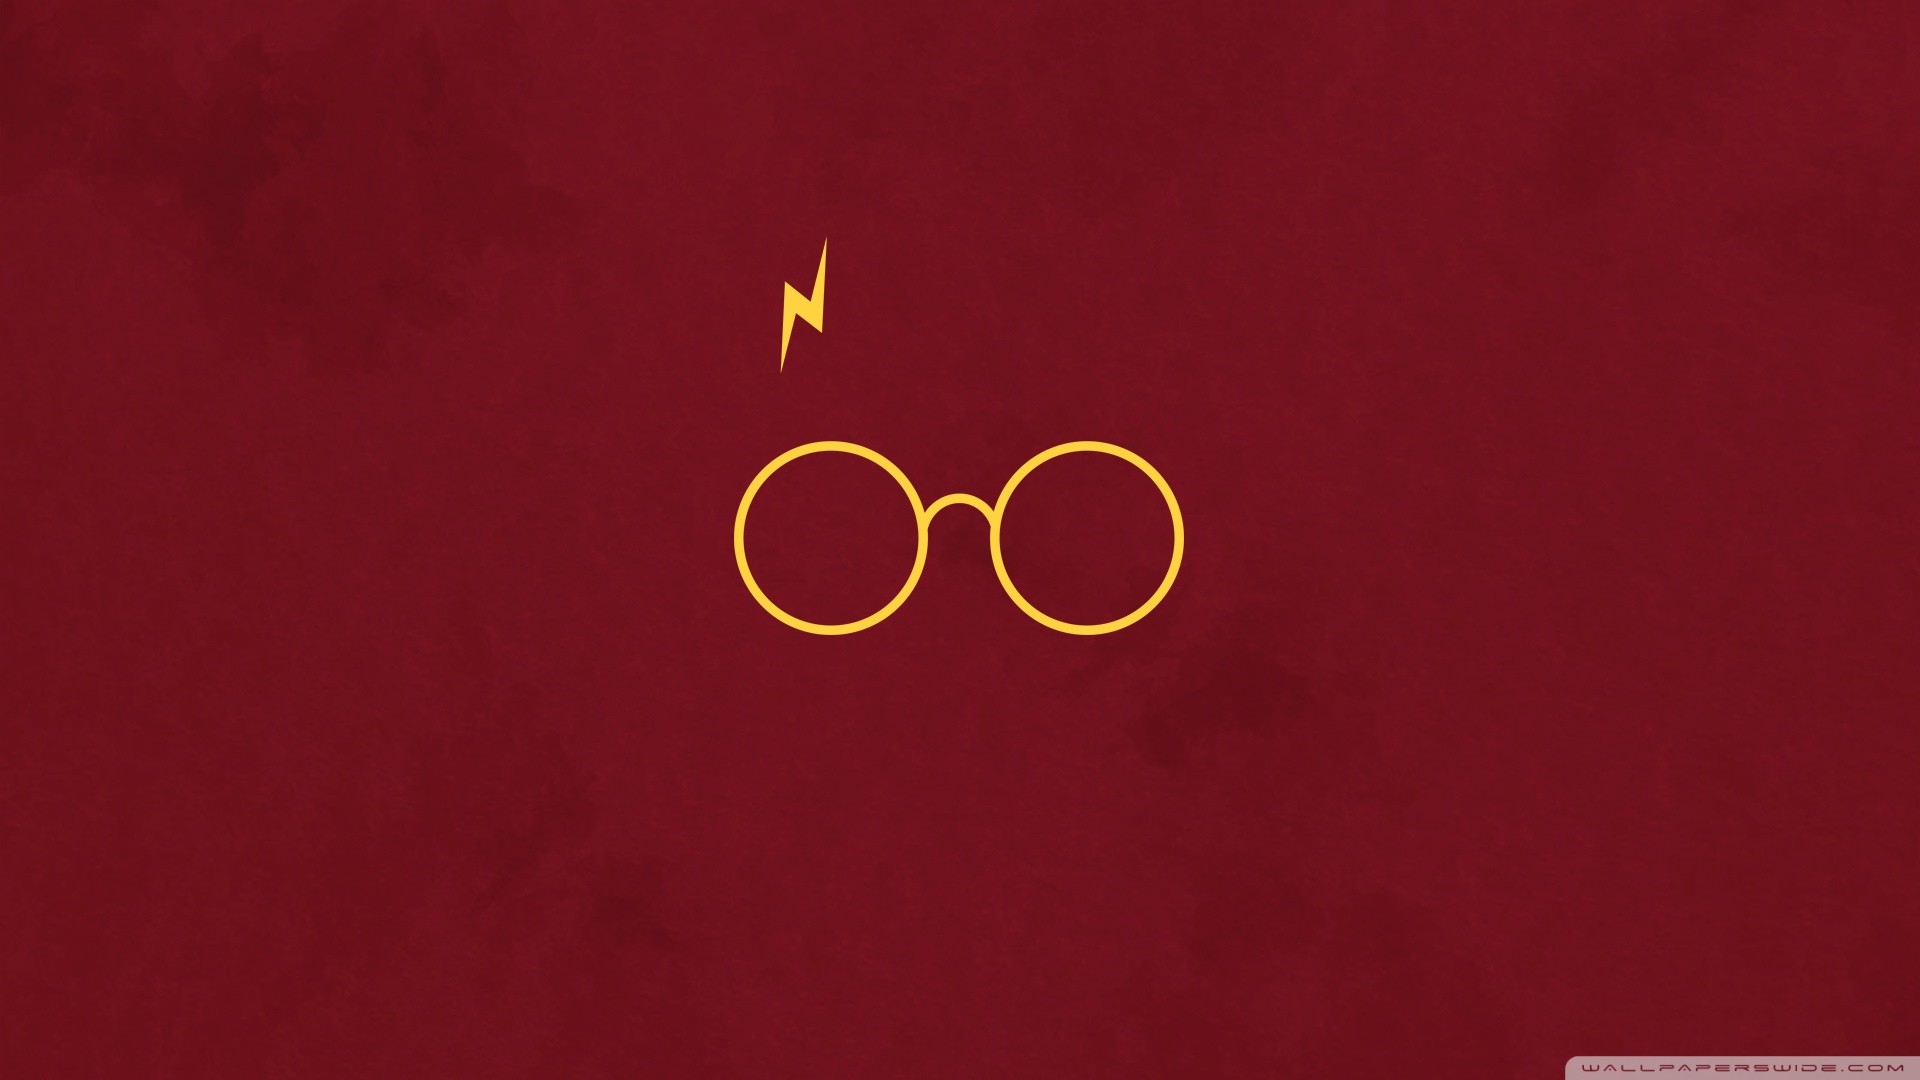 harry potter hd wallpapers 1080p